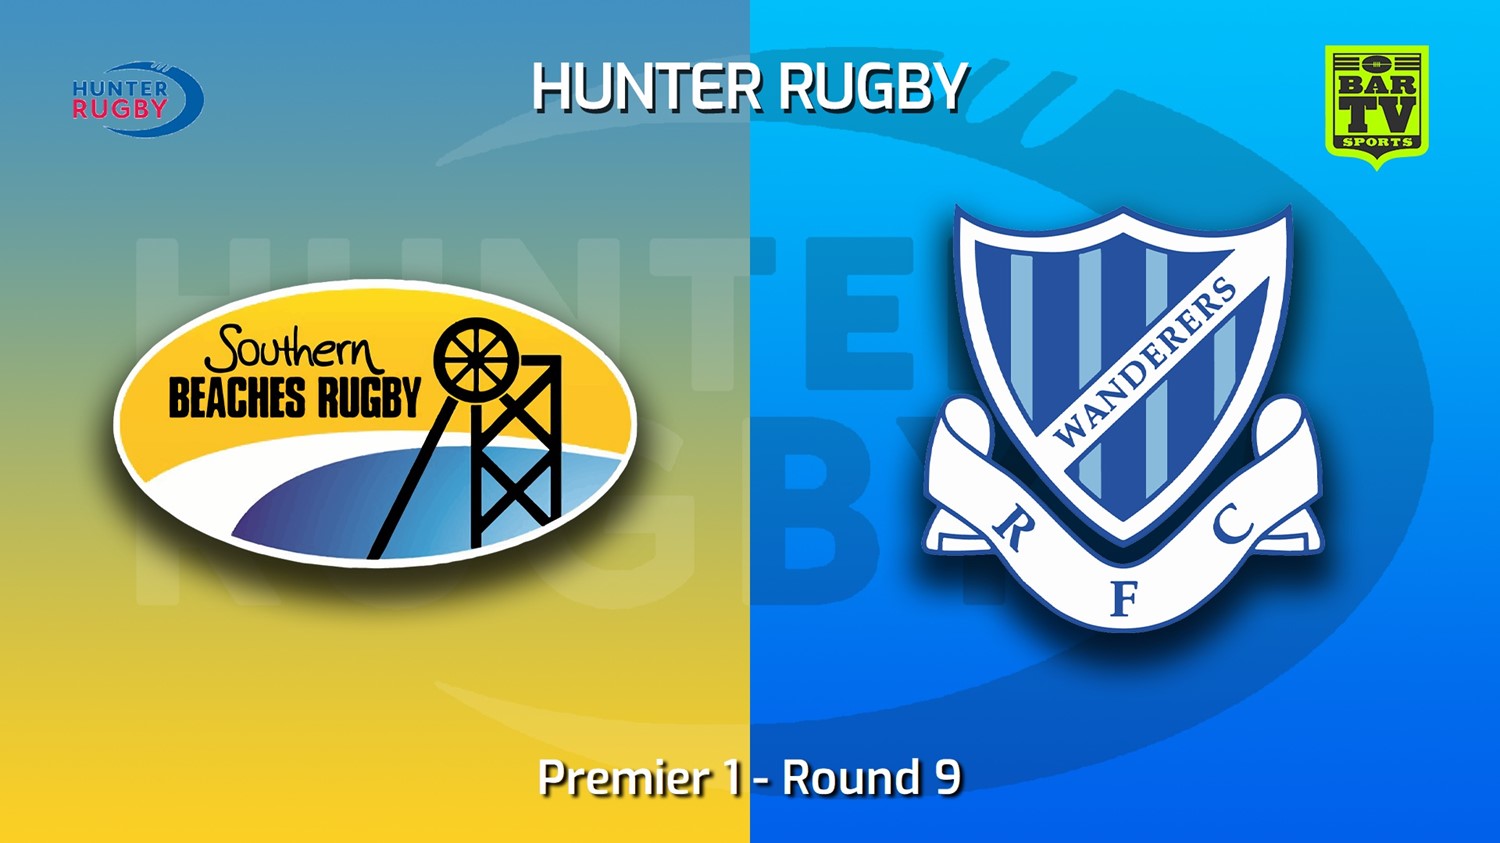 220625-Hunter Rugby Round 9 - Premier 1 - Southern Beaches v Wanderers Slate Image